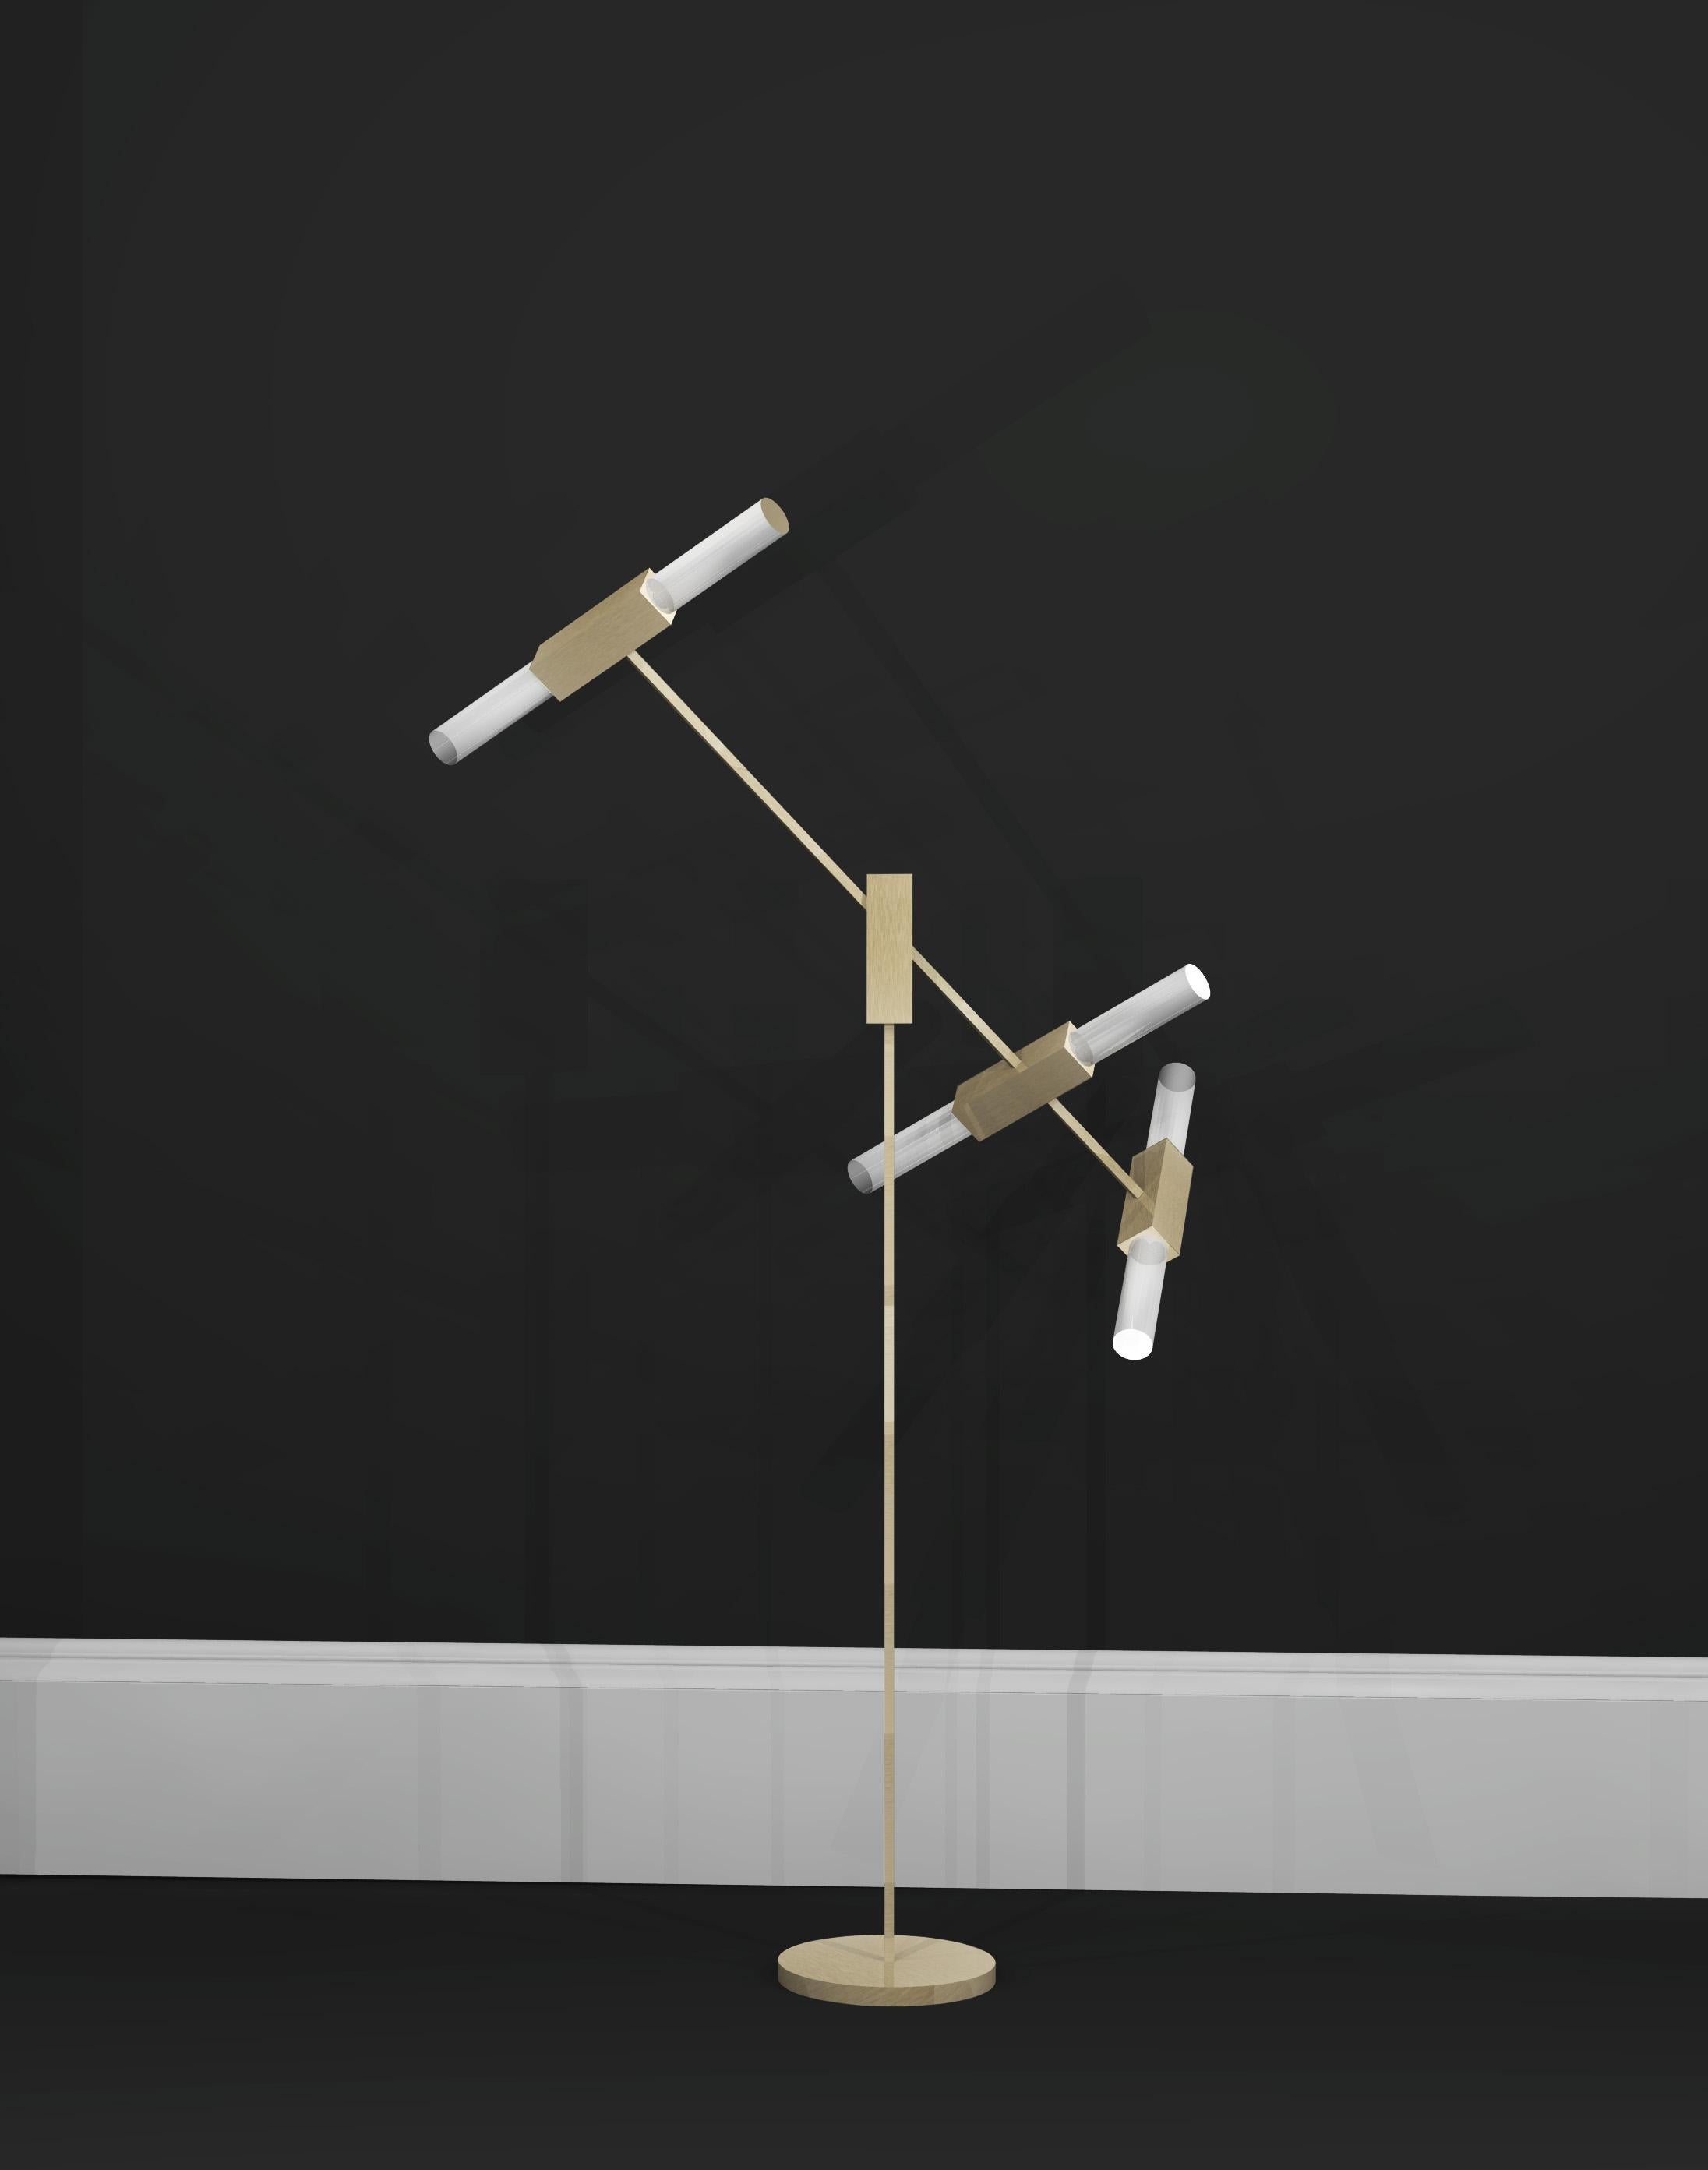 This floor lamp is part of a range that was originally designed as bathroom lights and developed into a full collection, created to achieve a timeless design. Using high quality materials including fine brass and glass, a striking, sleek design